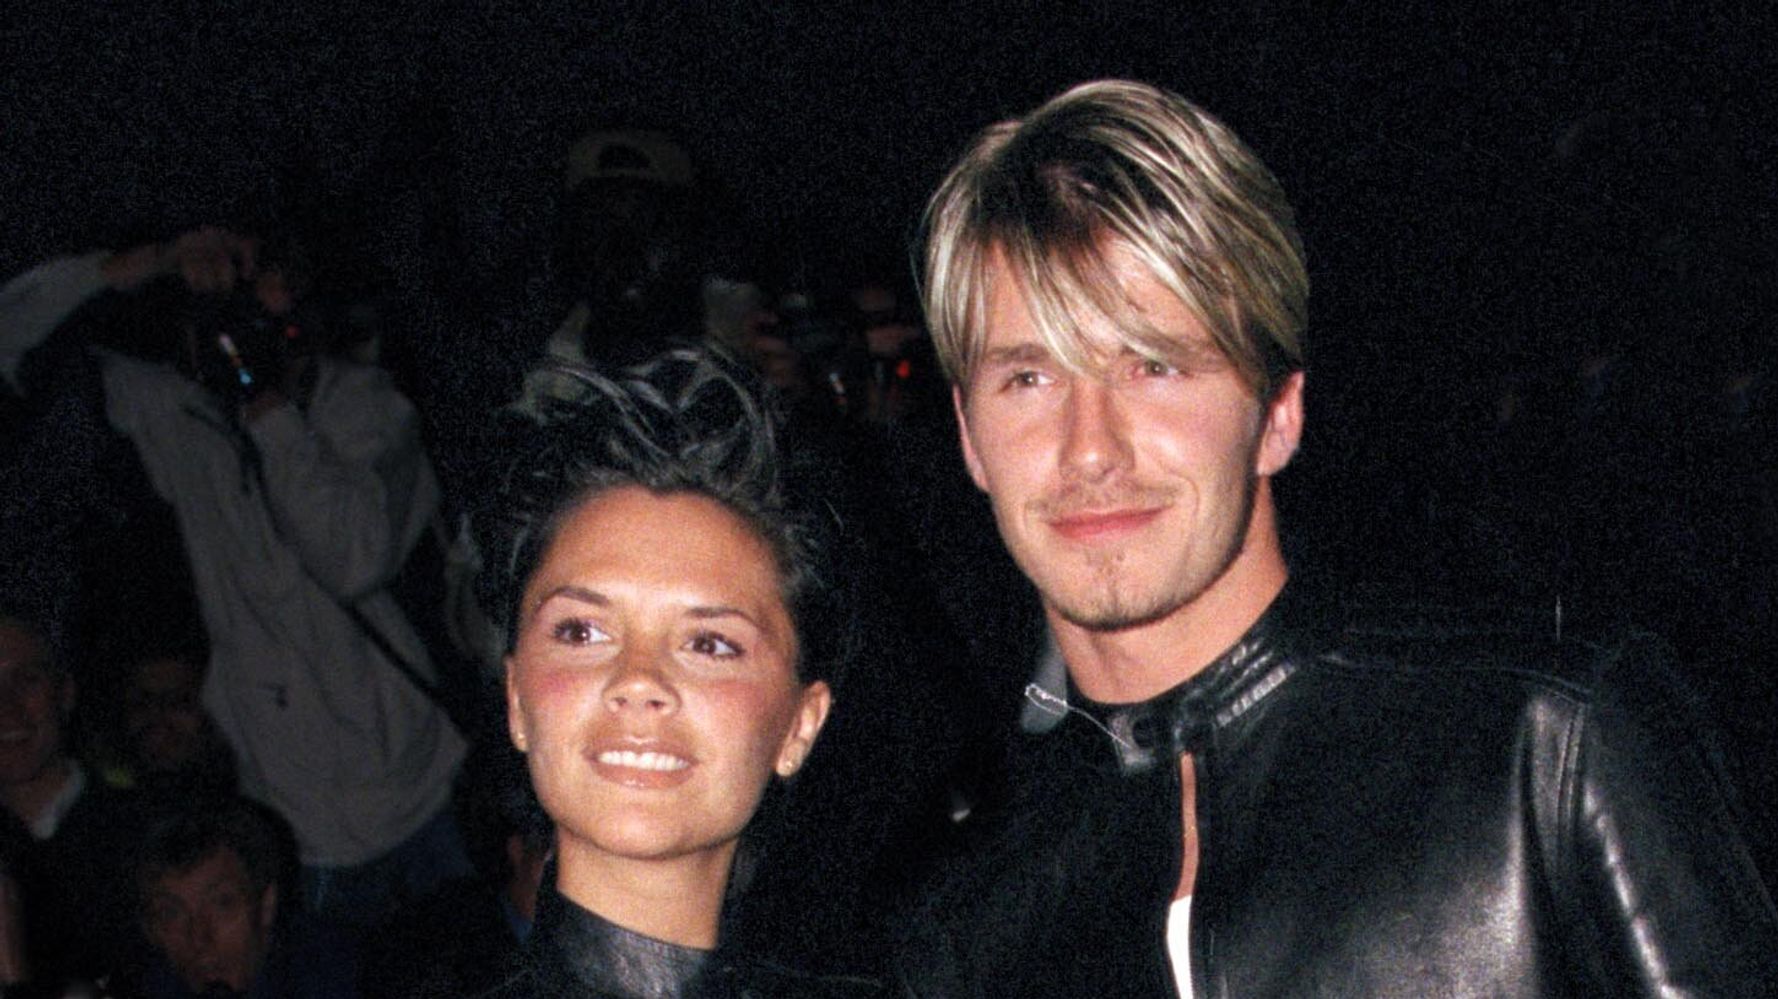 David Beckham Pokes Fun At Matching Outfits With Victoria In Anniversary Post